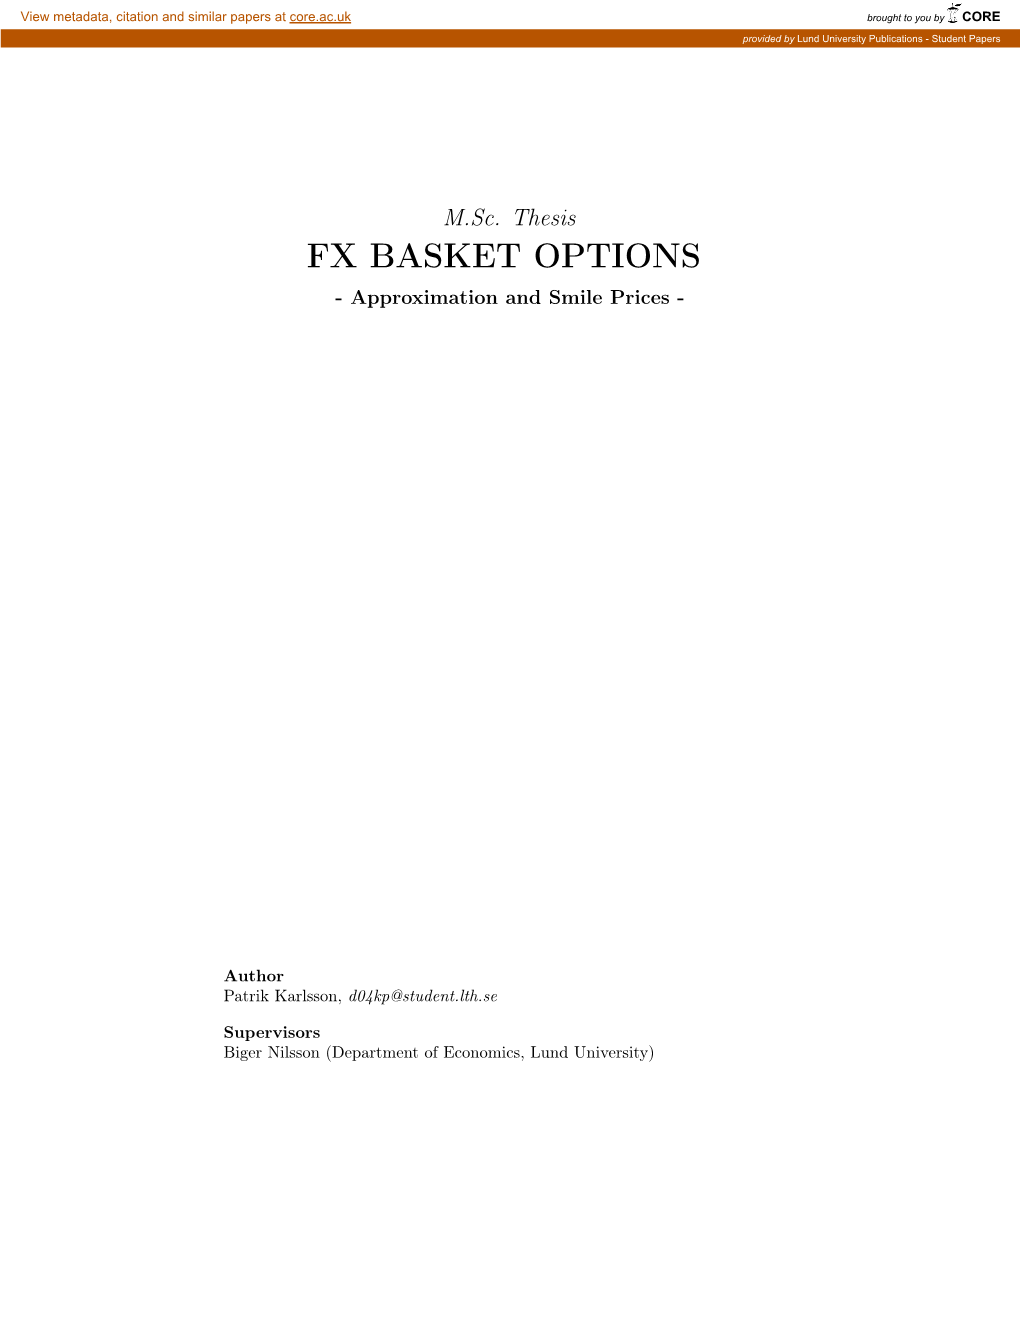 FX BASKET OPTIONS - Approximation and Smile Prices - ‌